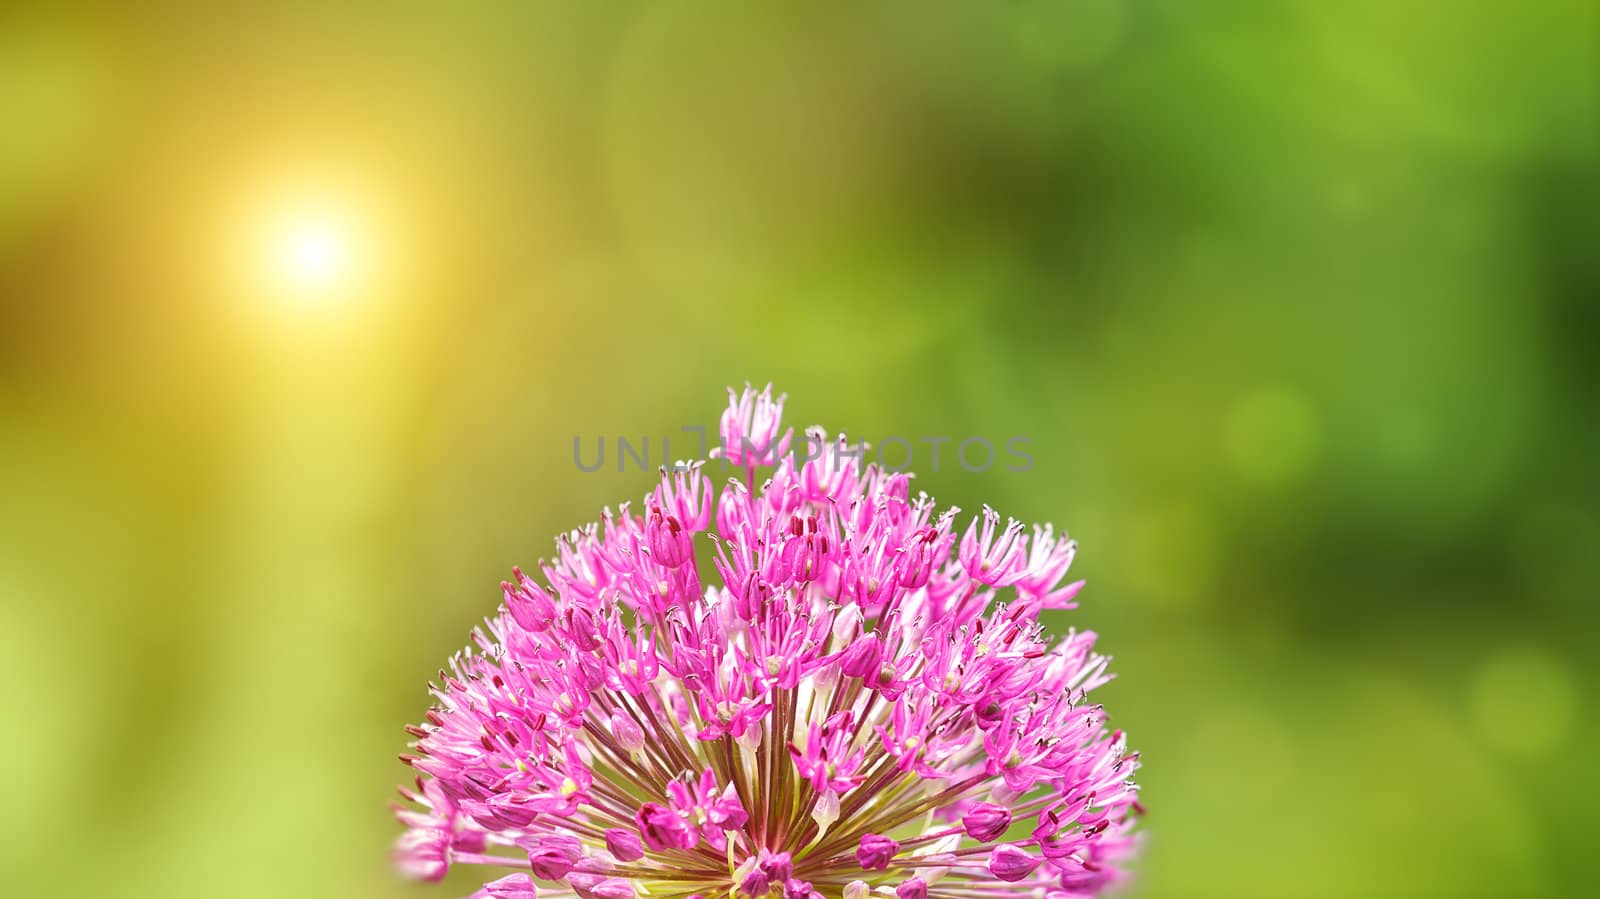 Summer background with blurred background and Allium flower in front